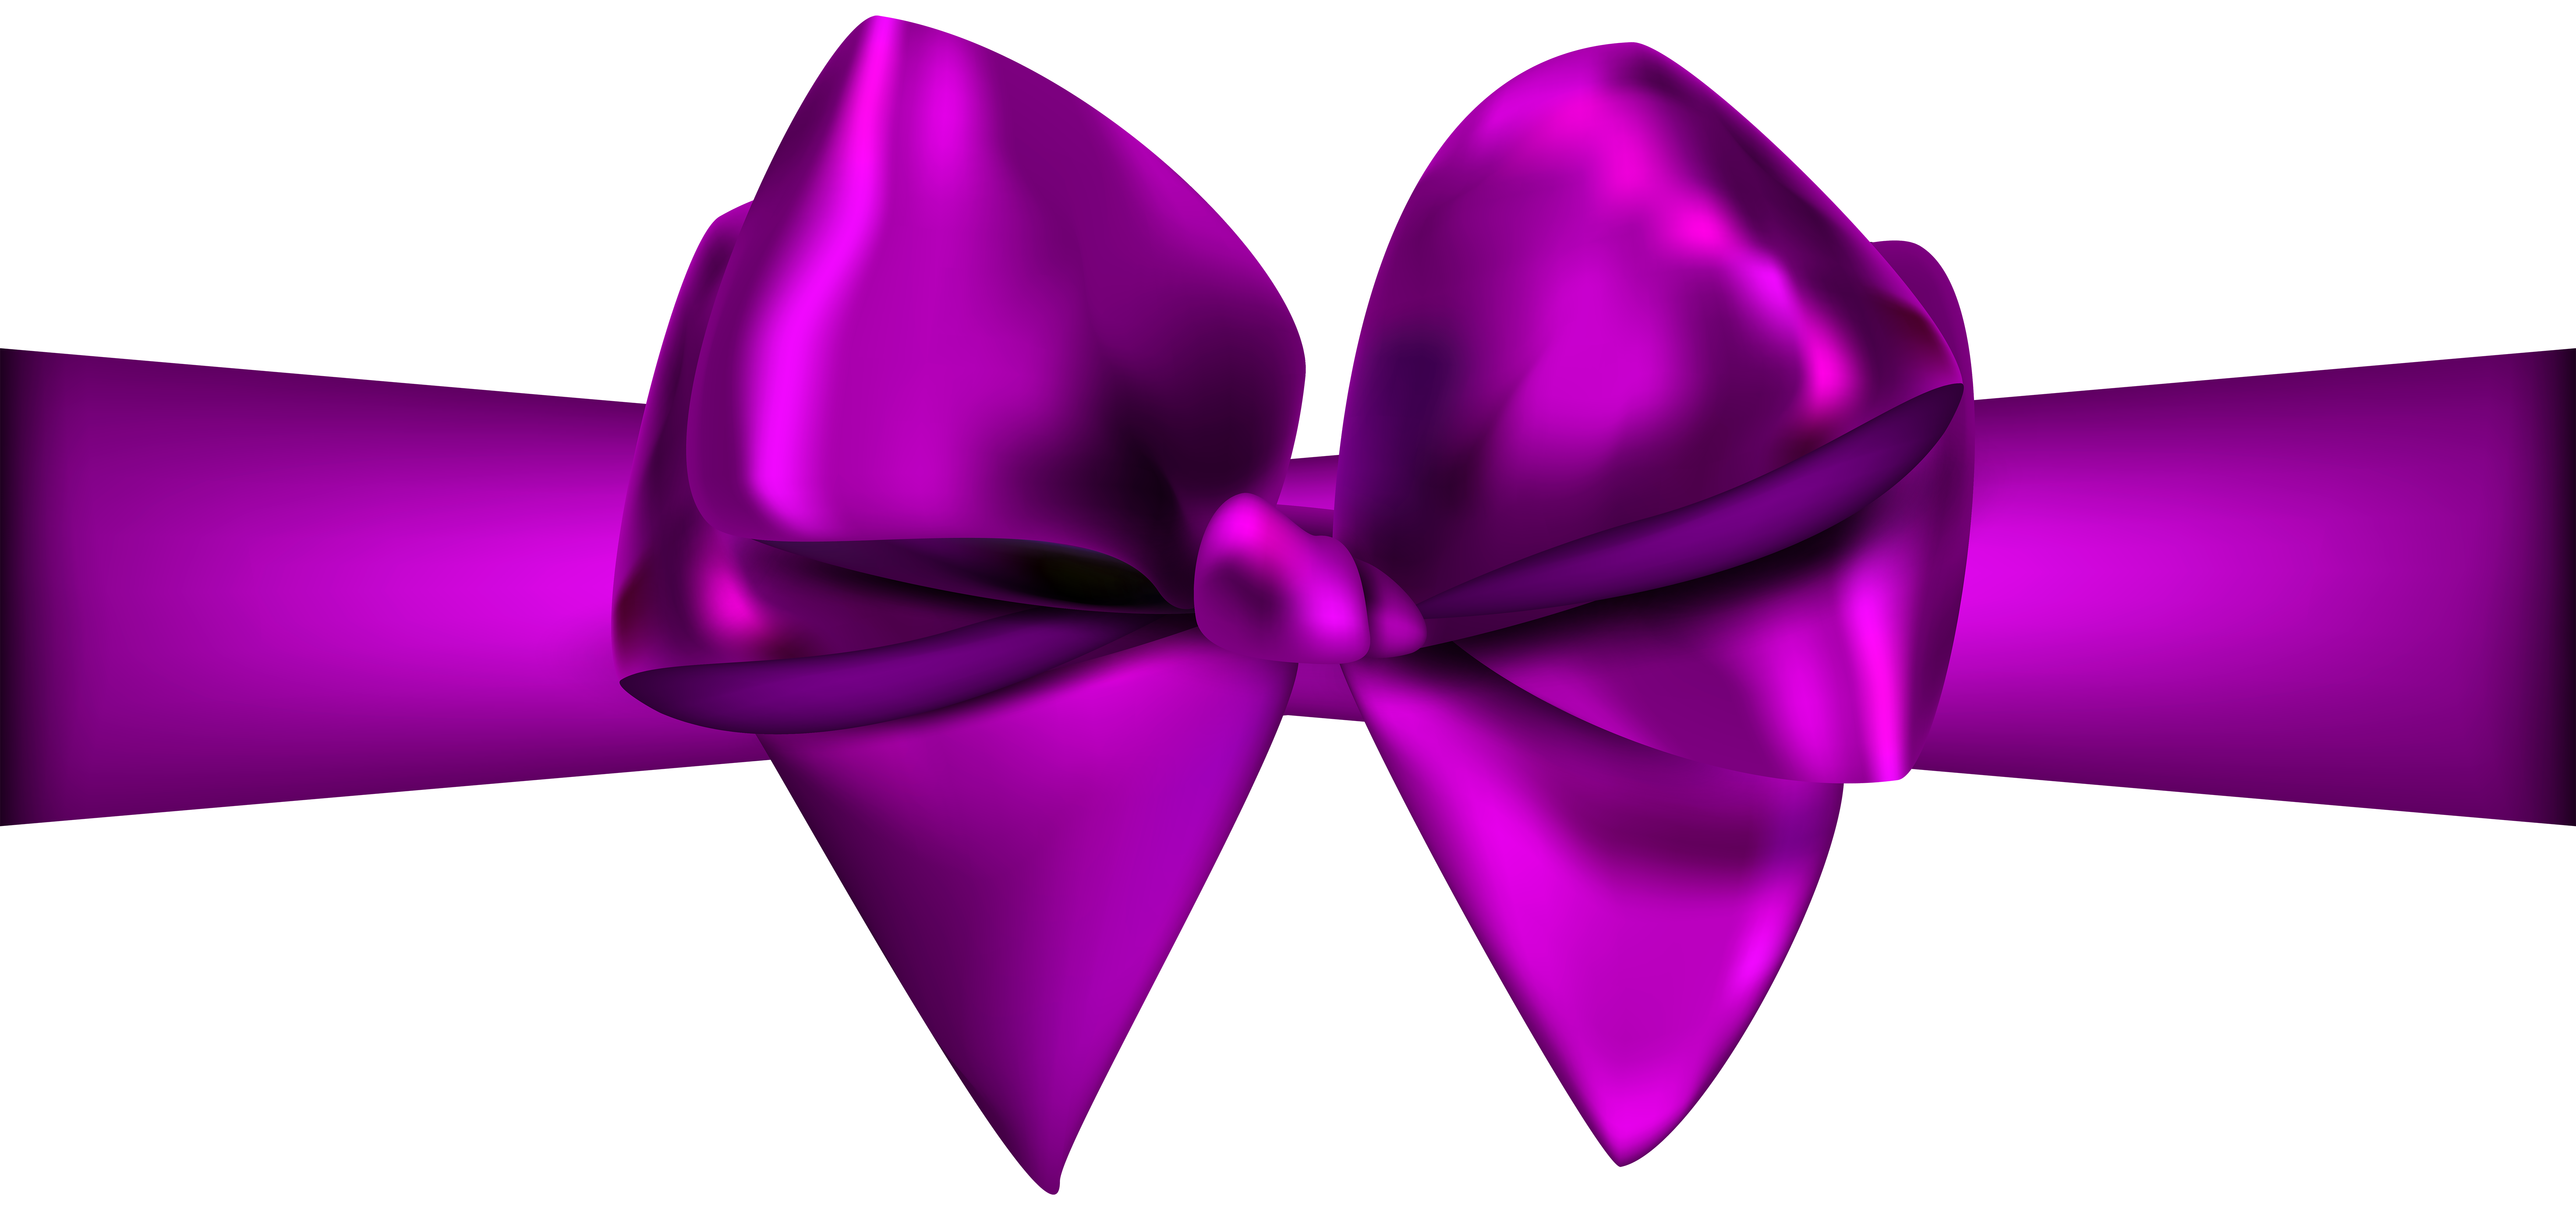 Purple Ribbon with Bow PNG Clip Art - Best WEB Clipart